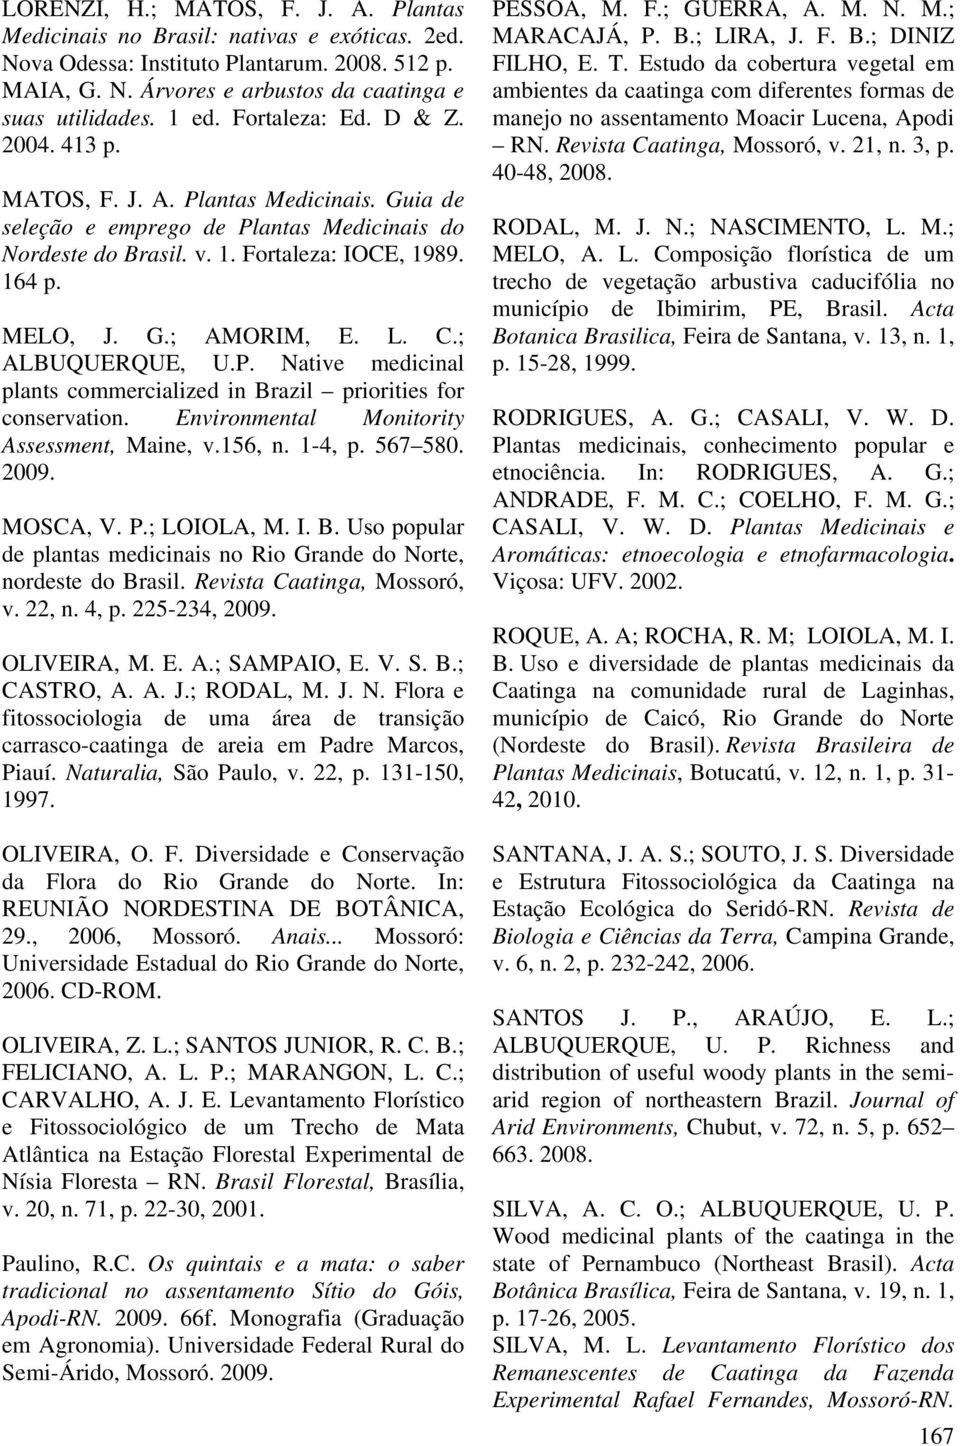 L. C.; ALBUQUERQUE, U.P. Native medicinal plants commercialized in Brazil priorities for conservation. Environmental Monitority Assessment, Maine, v.156, n. 1-4, p. 567 580. 2009. MOSCA, V. P.